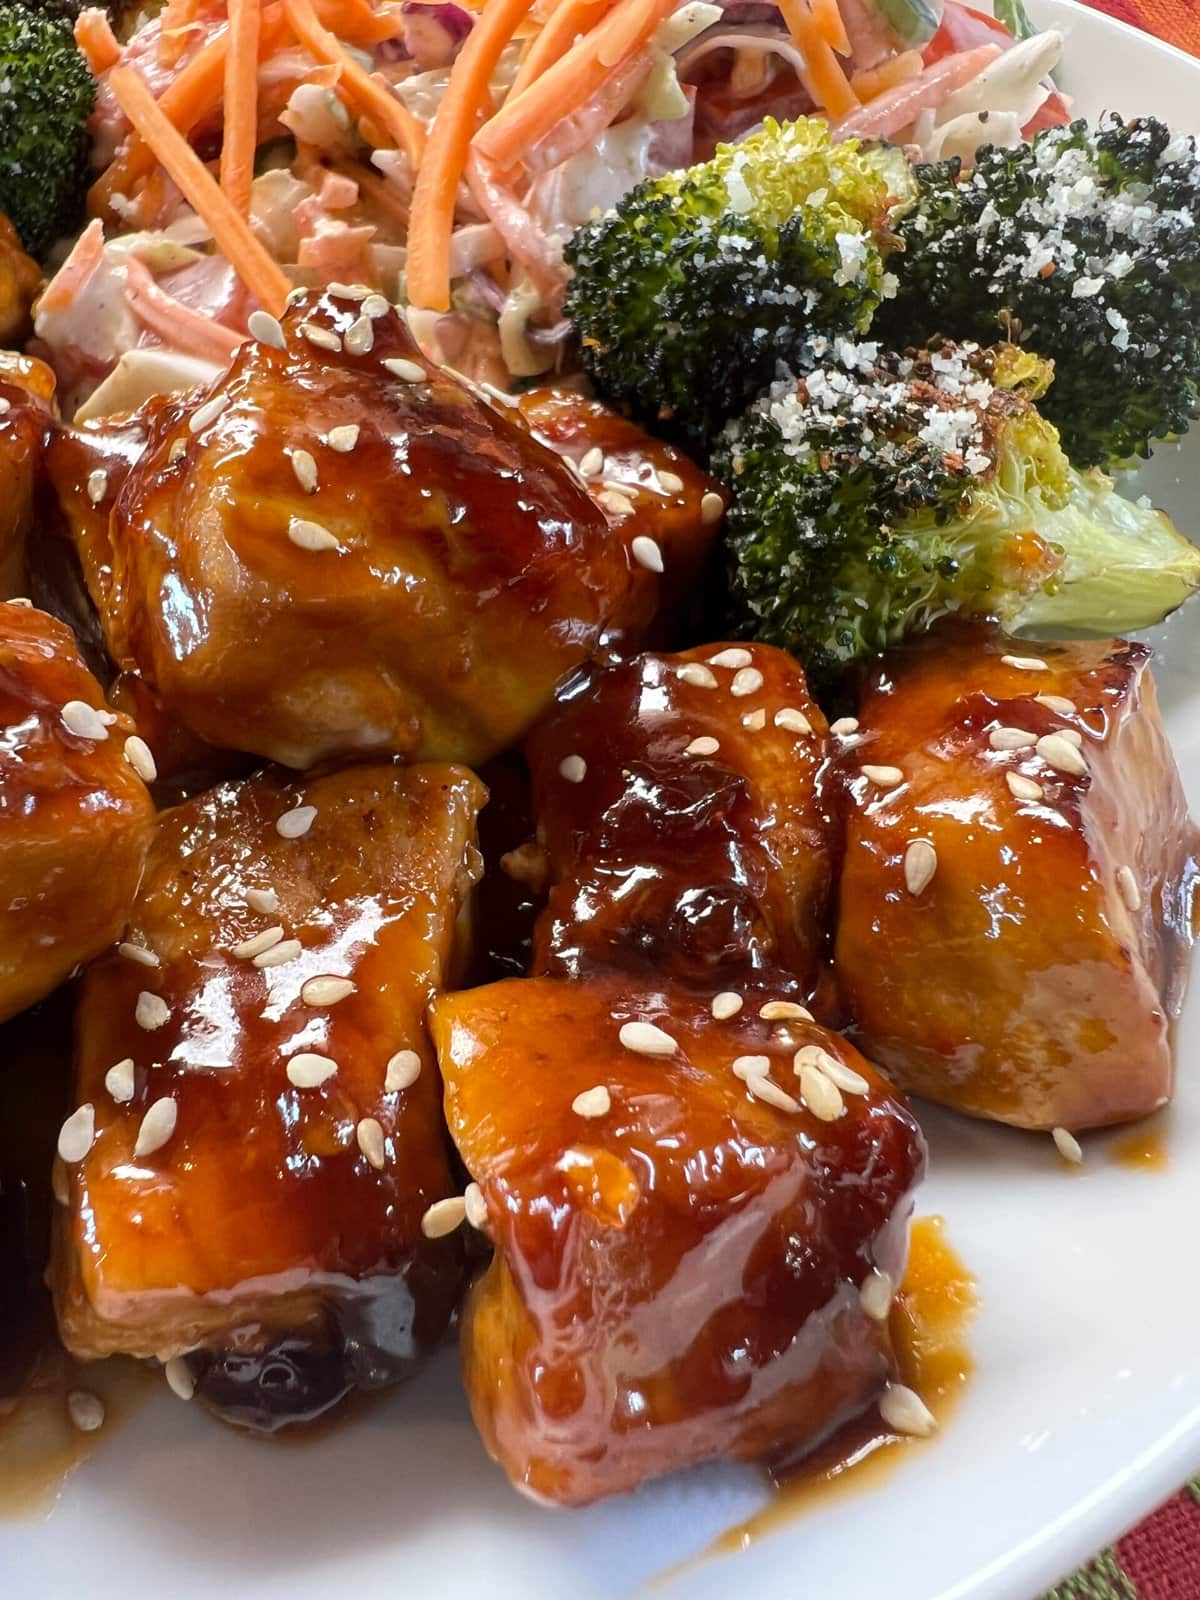 Saucy pork cubes with broccoli and salad on a white plate. 